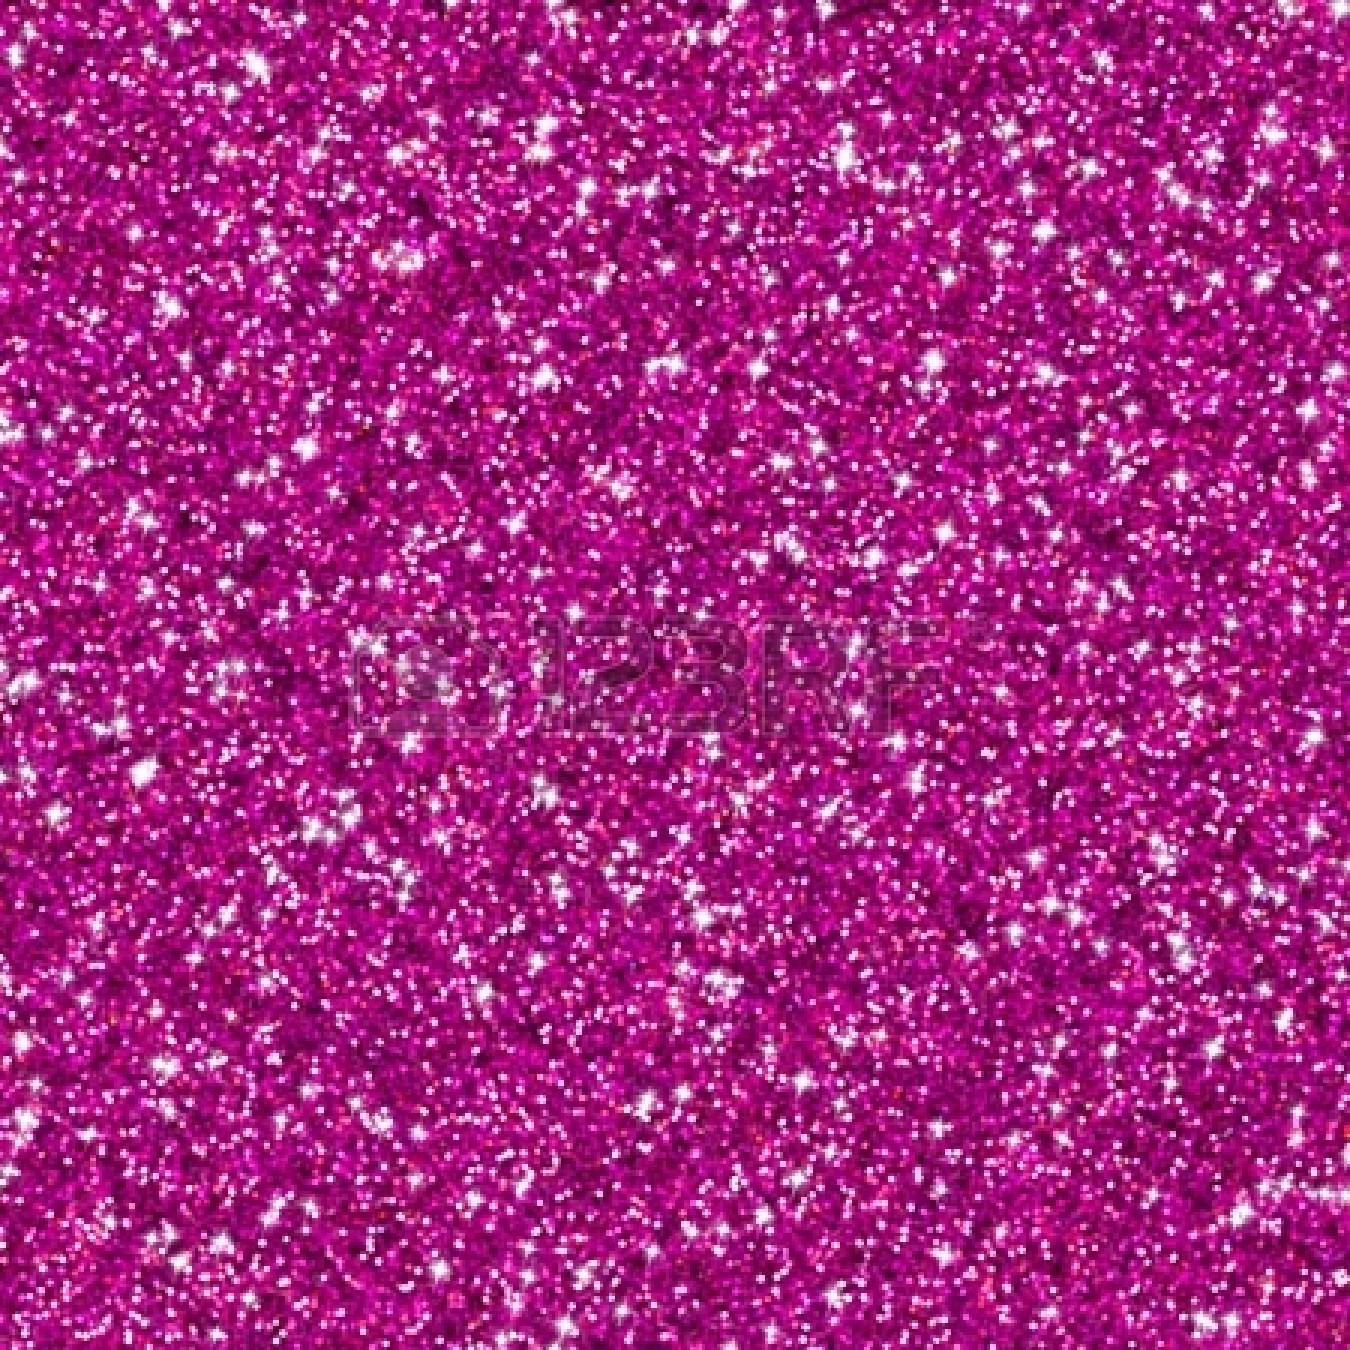 Pink Sparkly Background HD Wallpaper On Picsfair